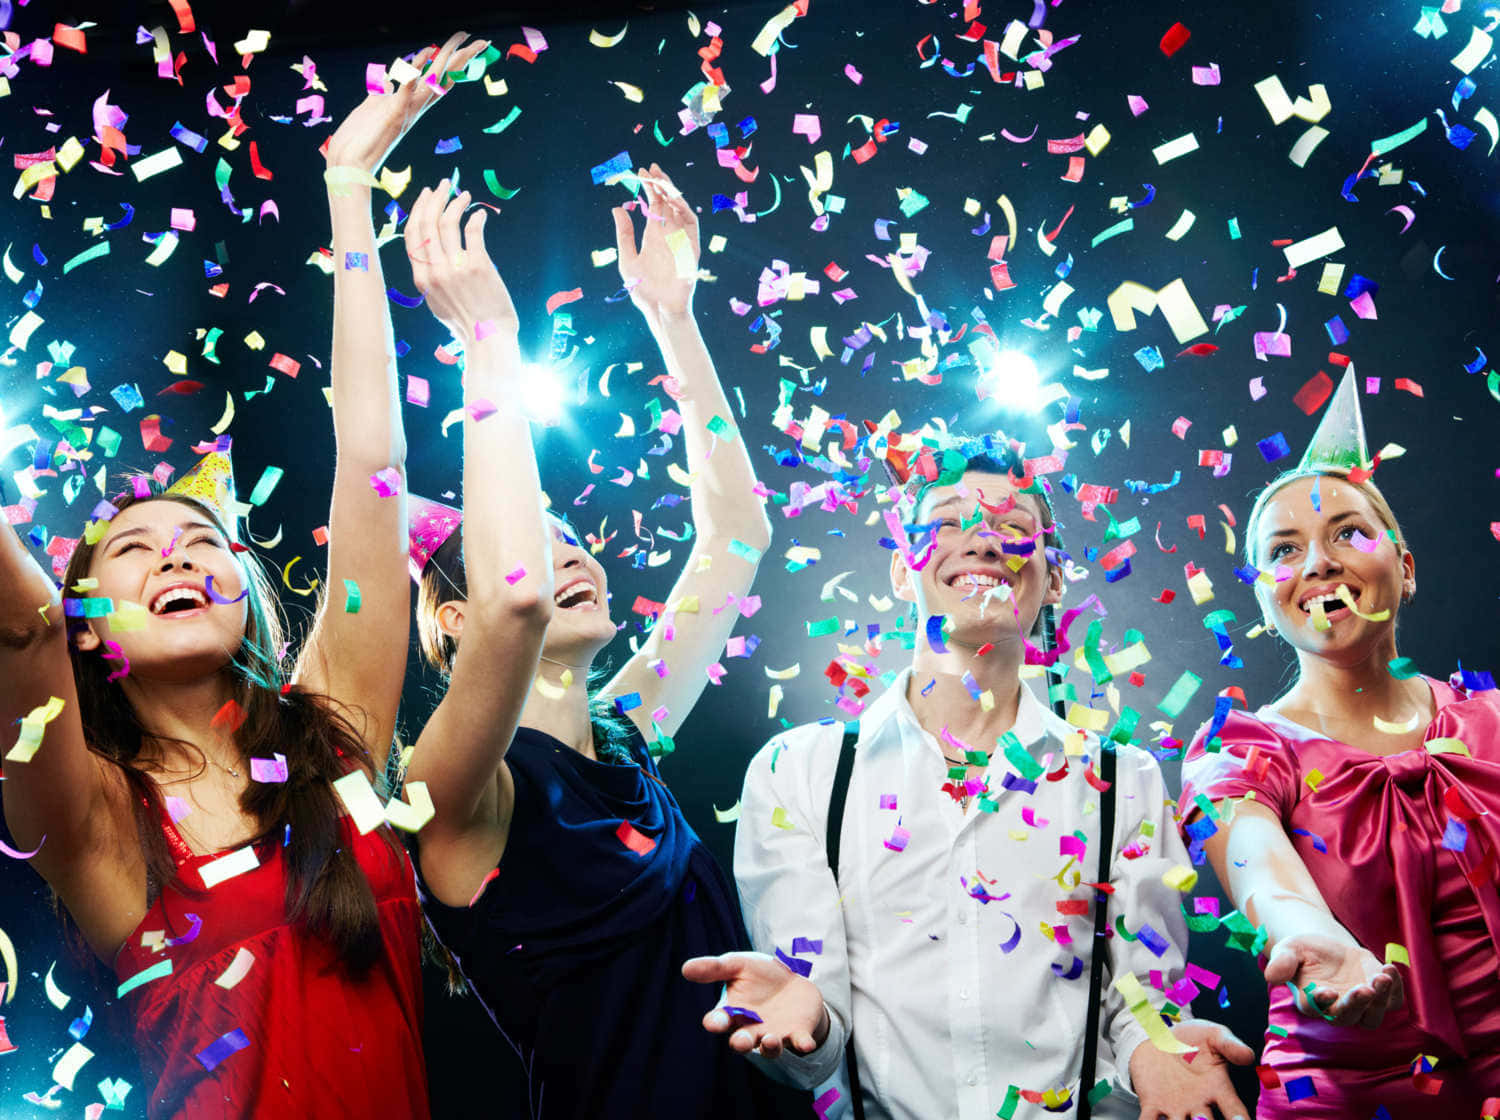 A Group Of People Celebrating A Party With Confetti